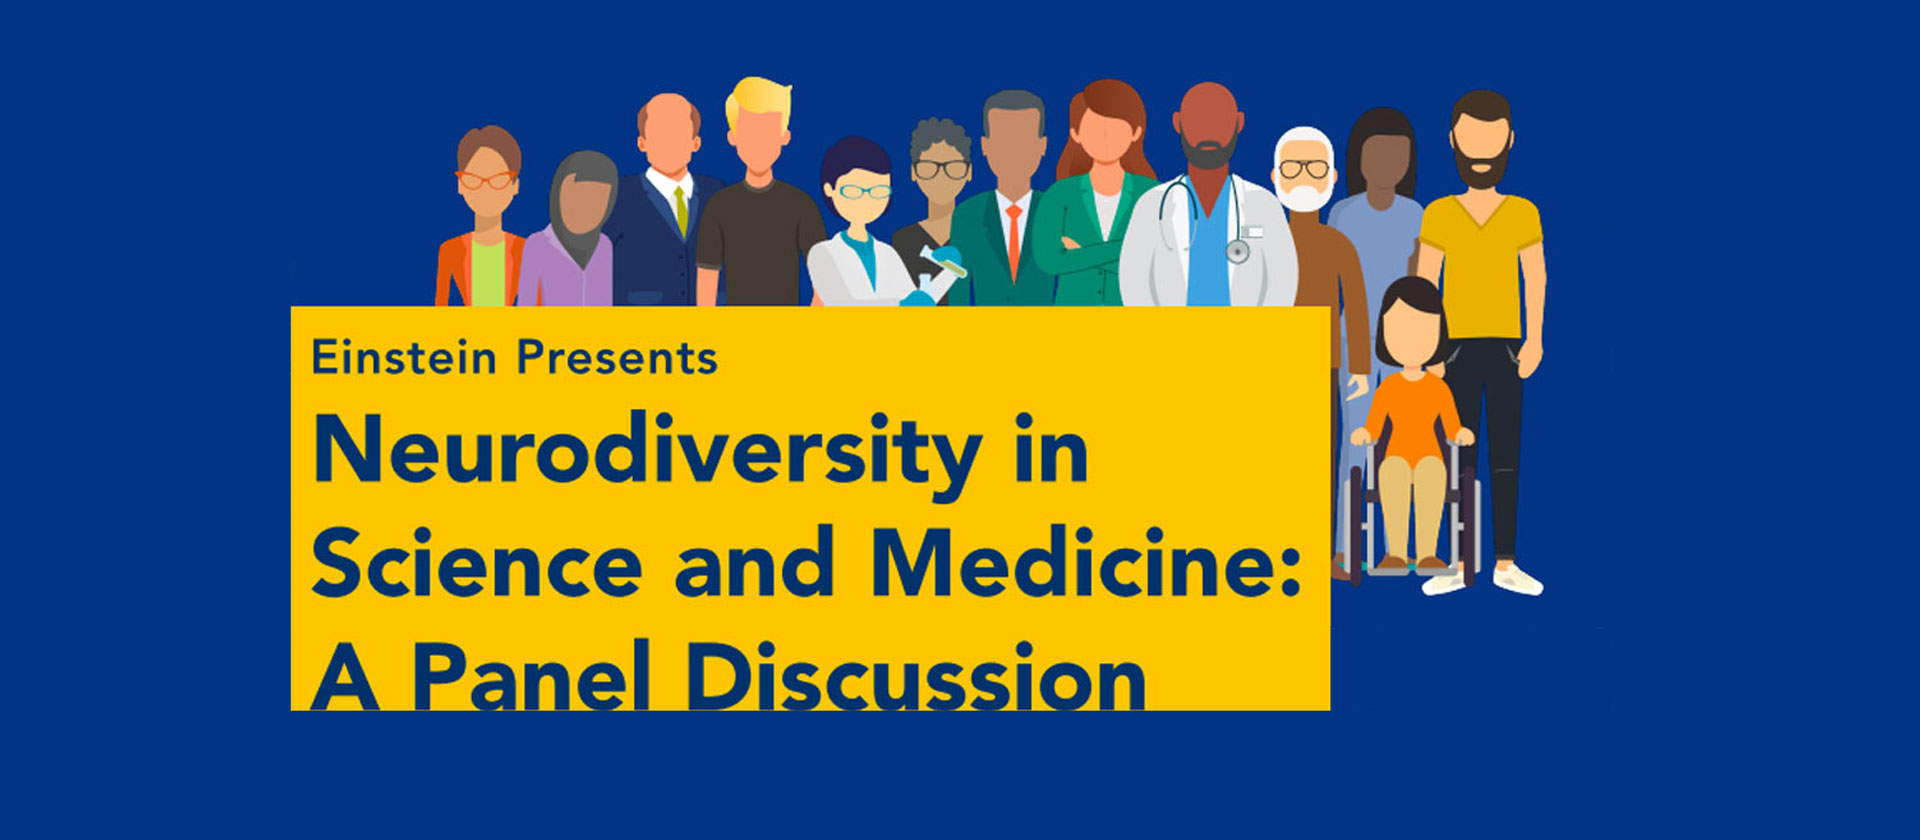 Neurodiversity in Science and Medicine